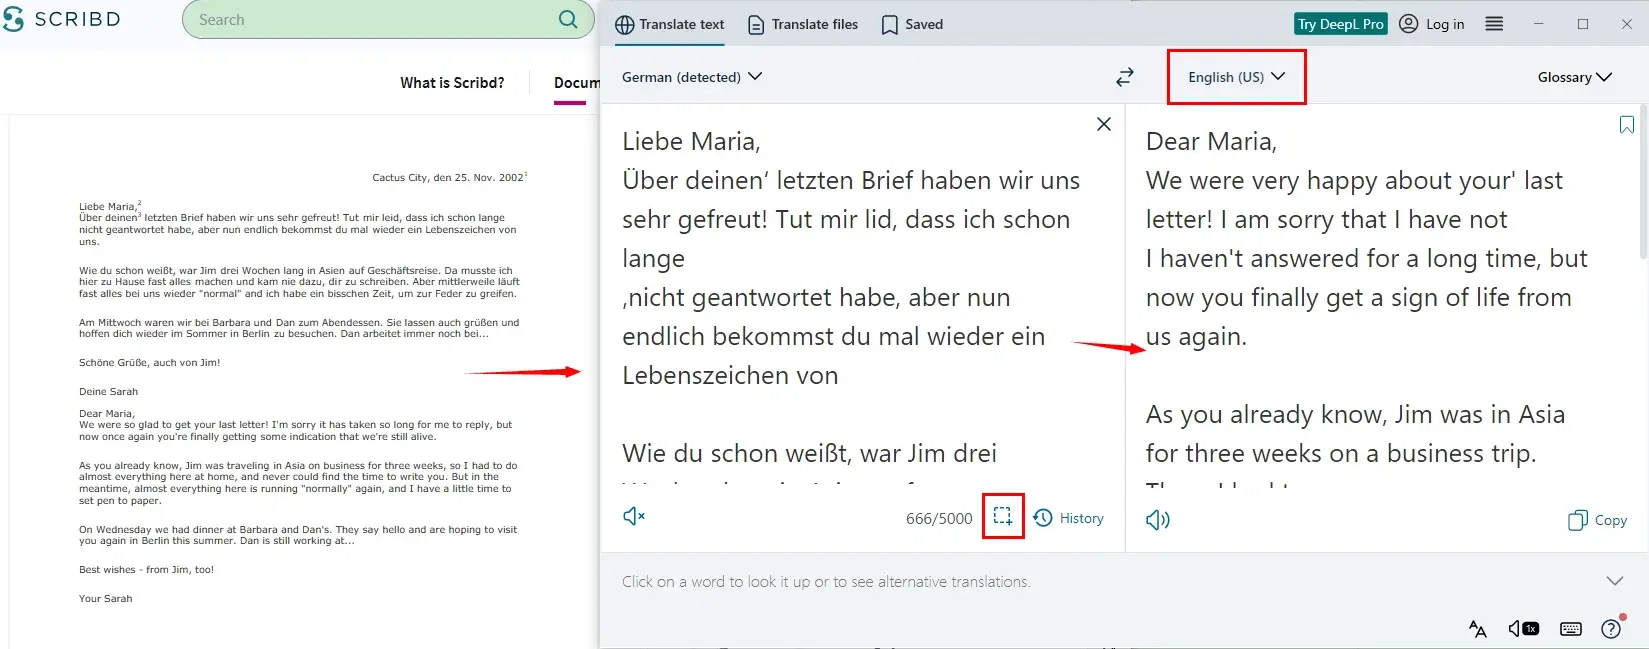 how to translate emails to english in deepl screenshot translation